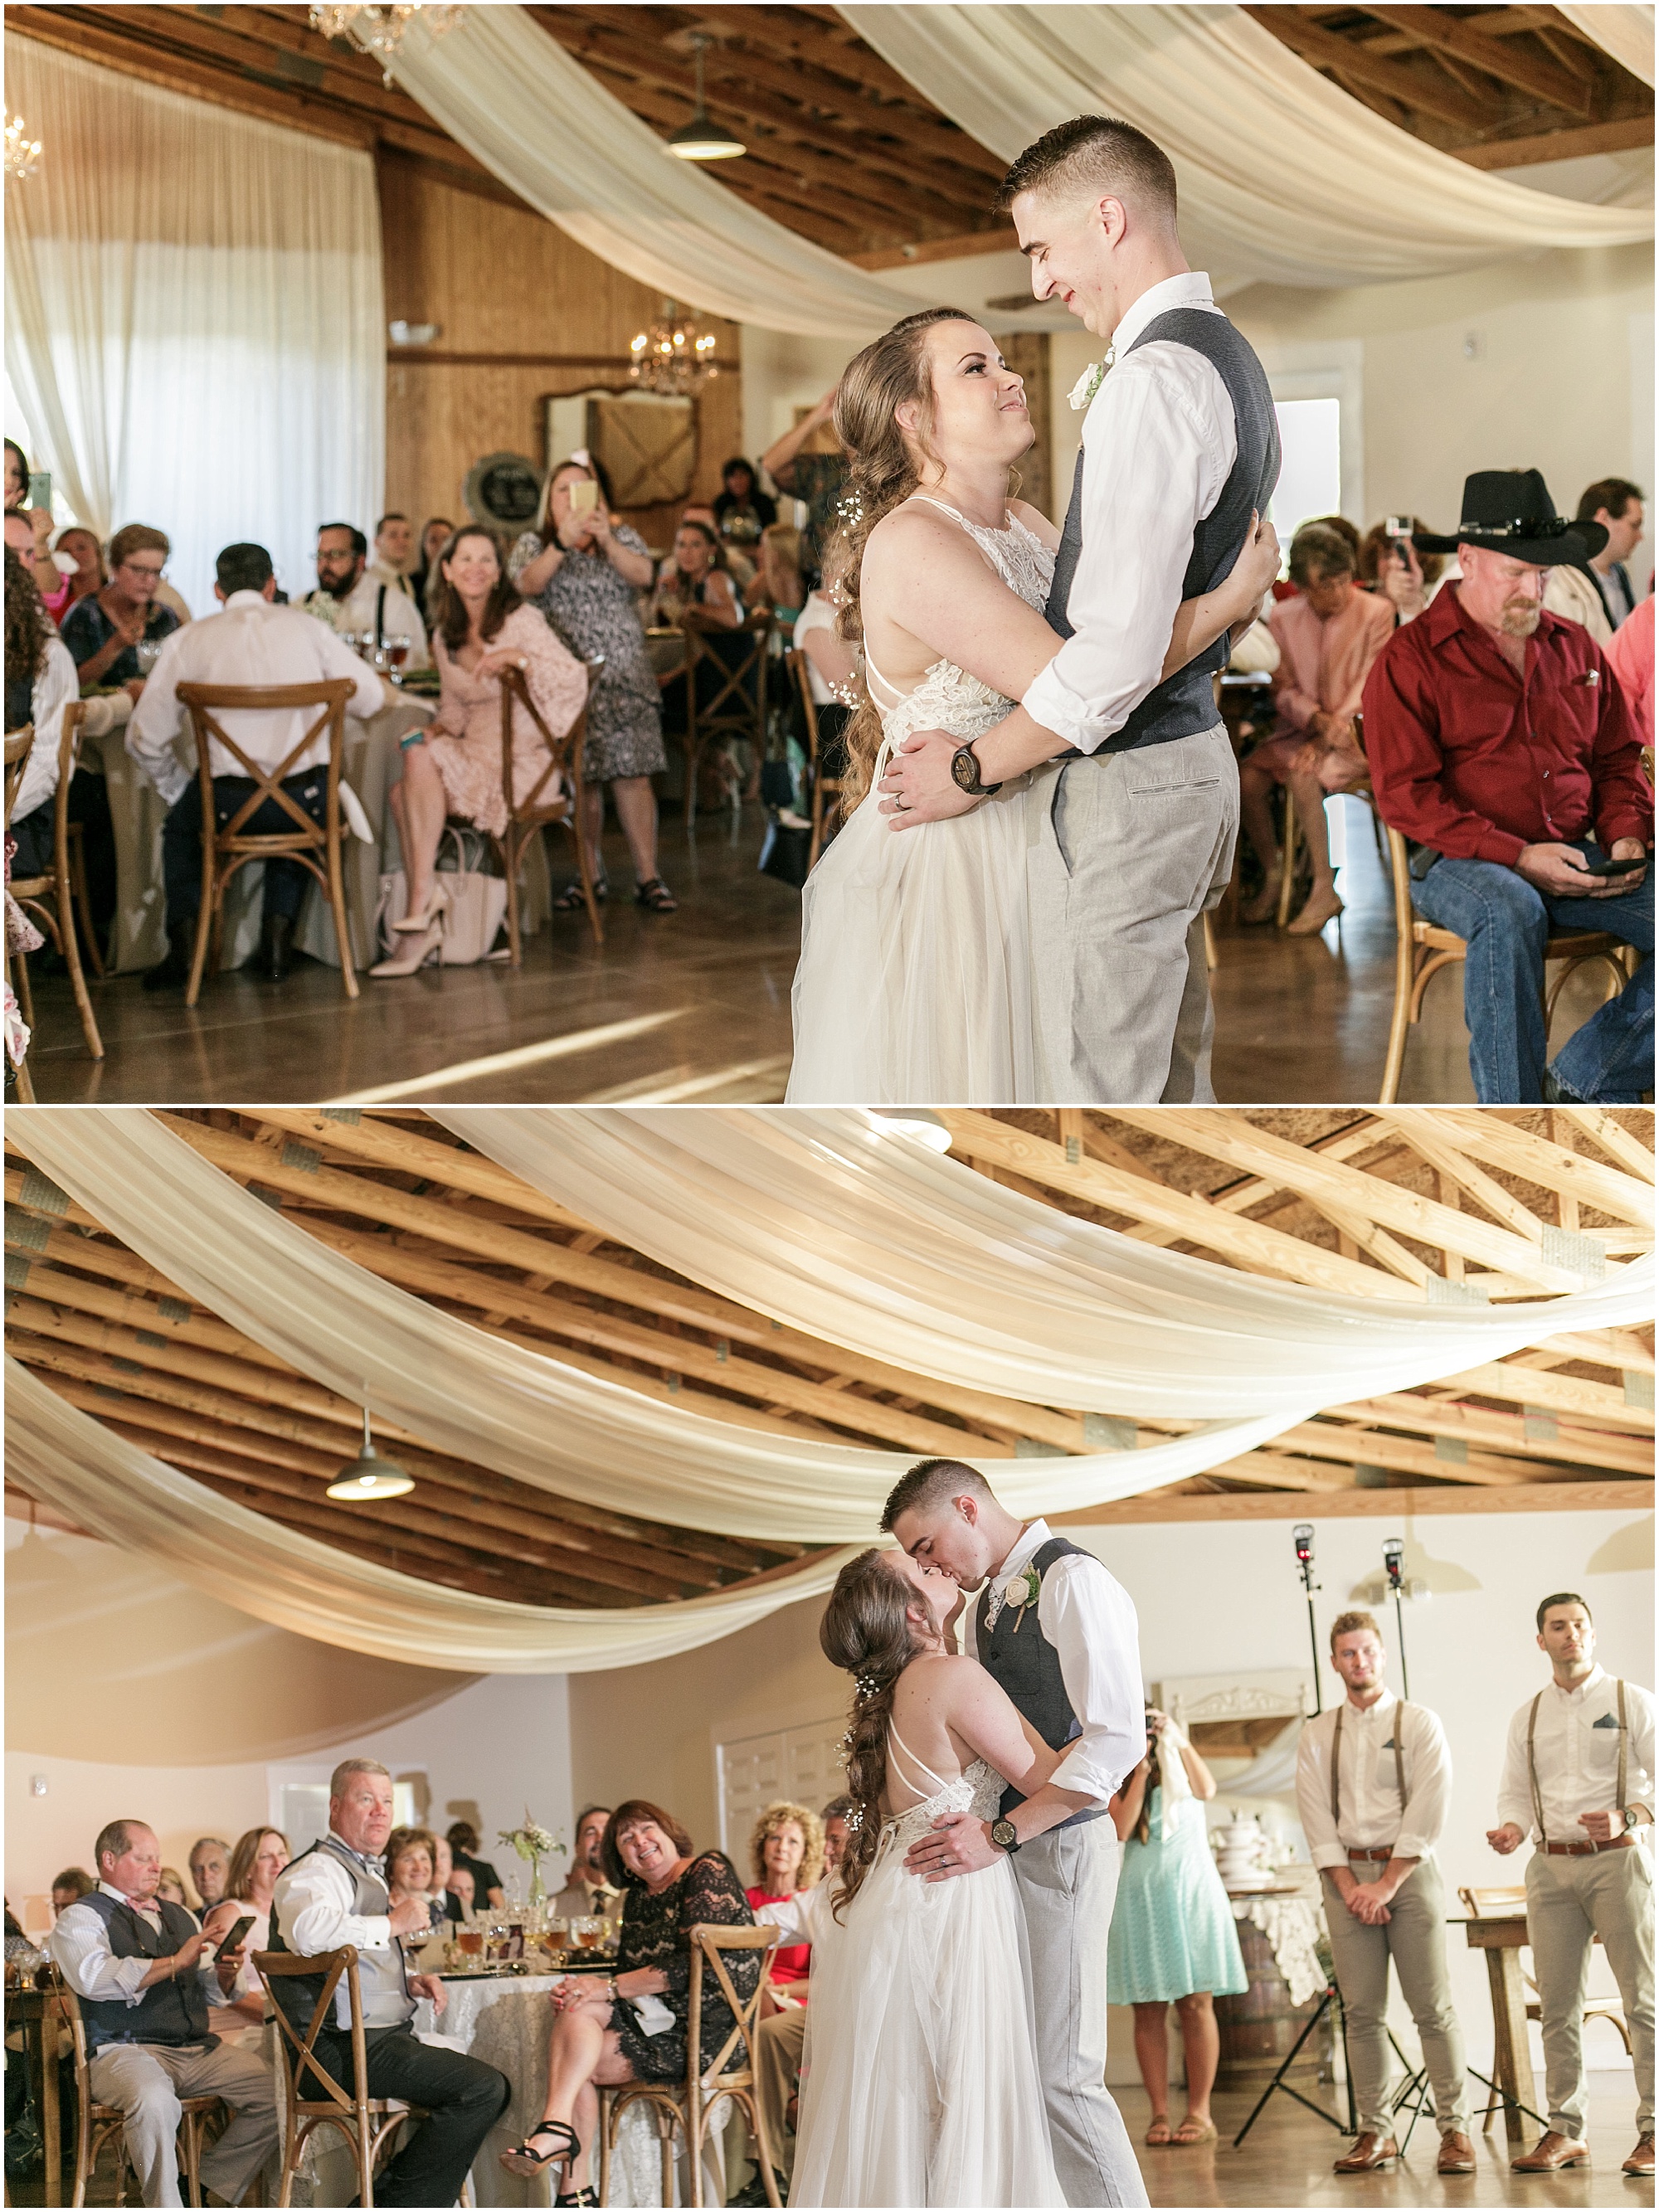 Bride and groom having their first dance as a married couple